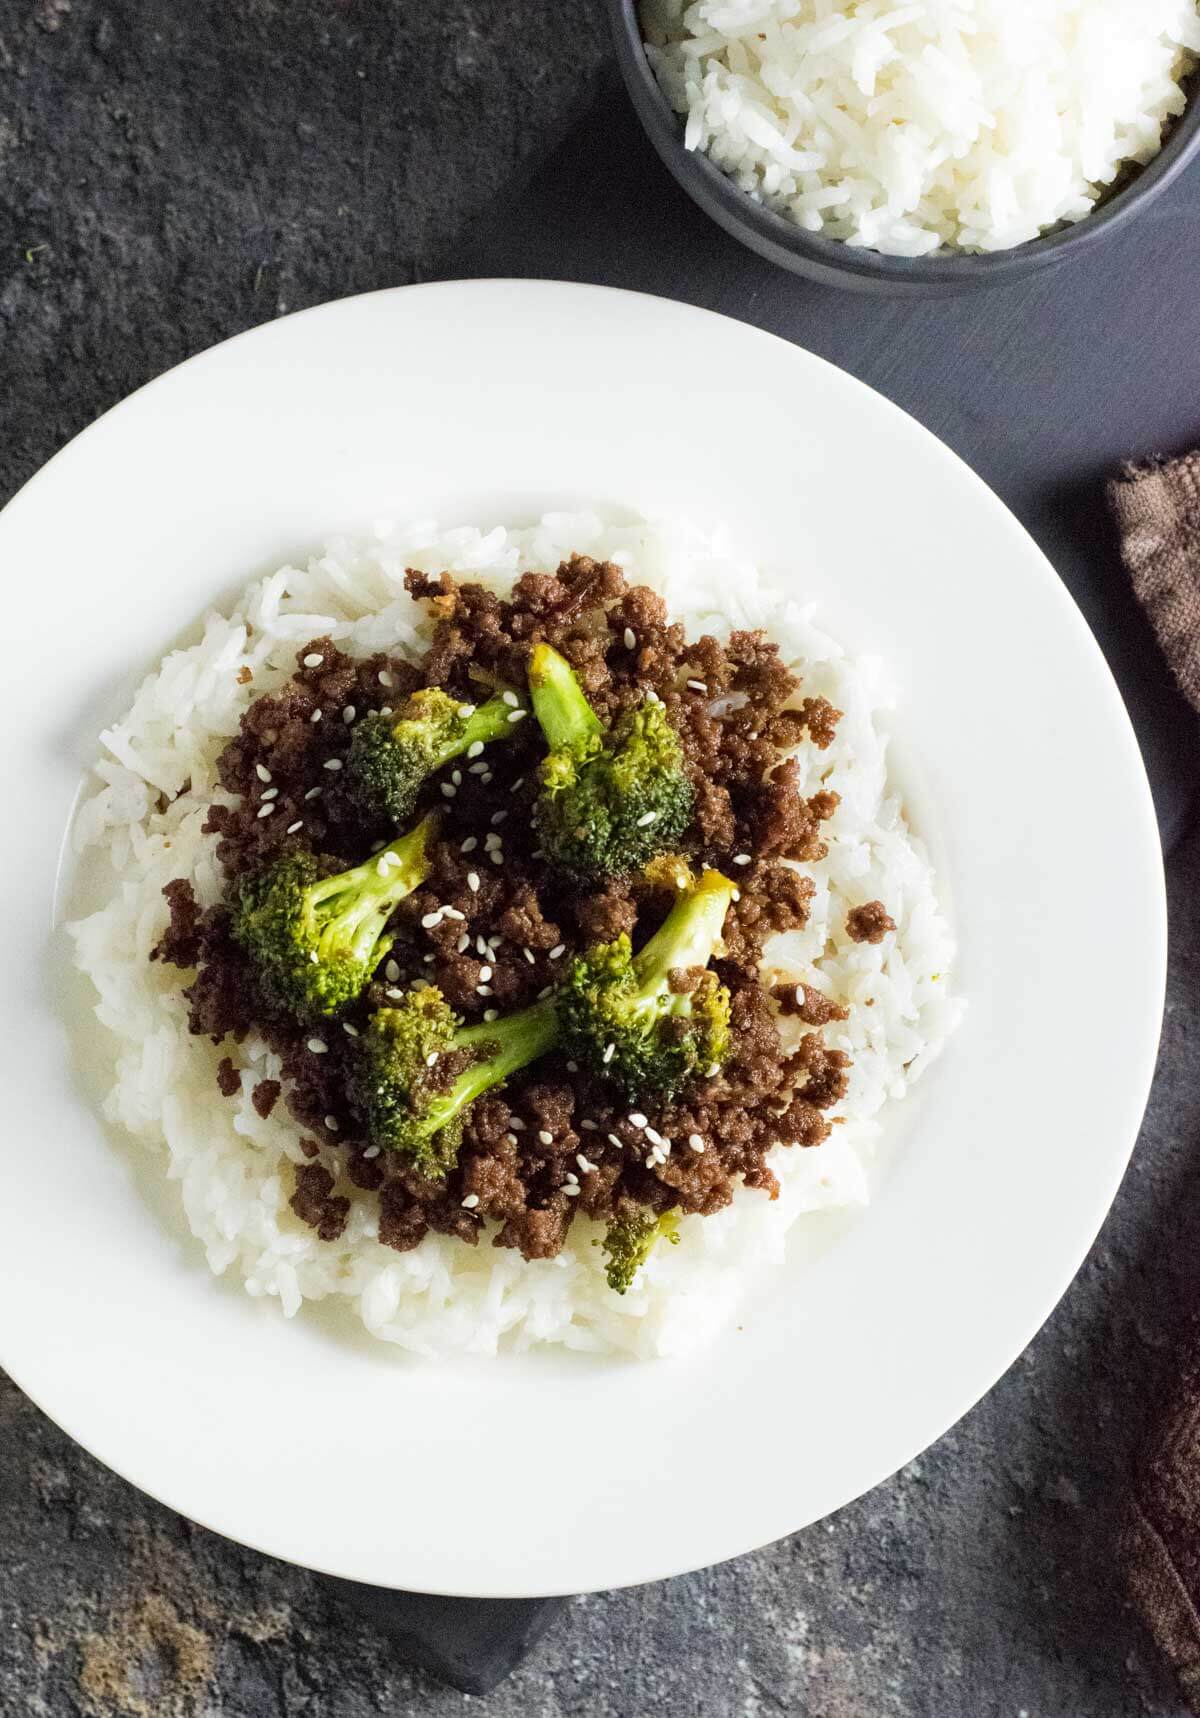 Ground beef and broccoli stir fry shown from above.